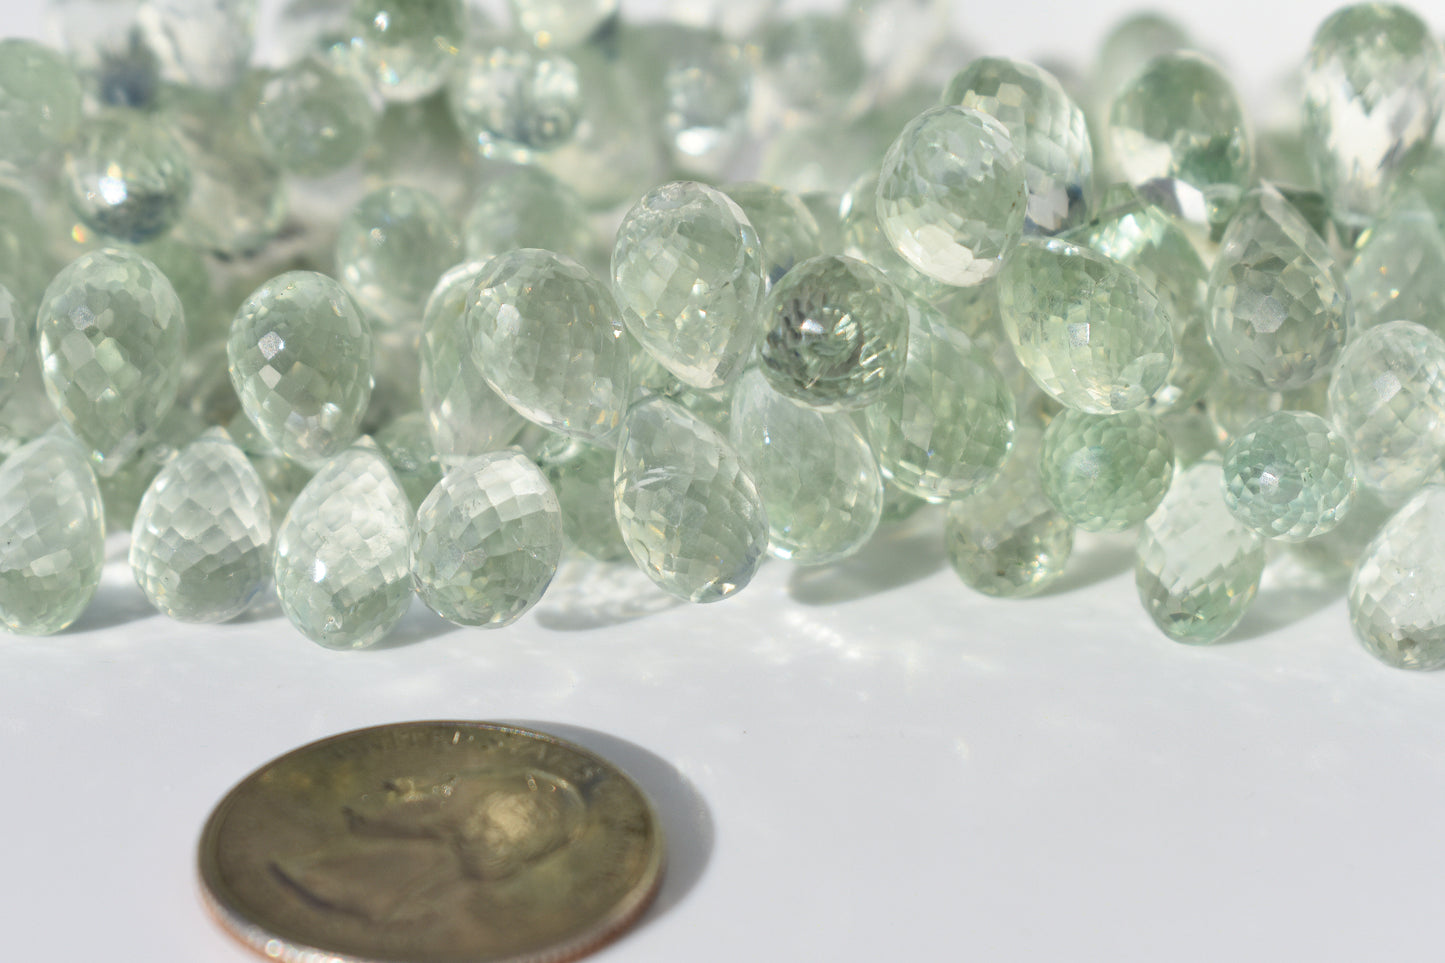 Green Amethyst Drop Beads - Dazzling Faceted Briolette Family